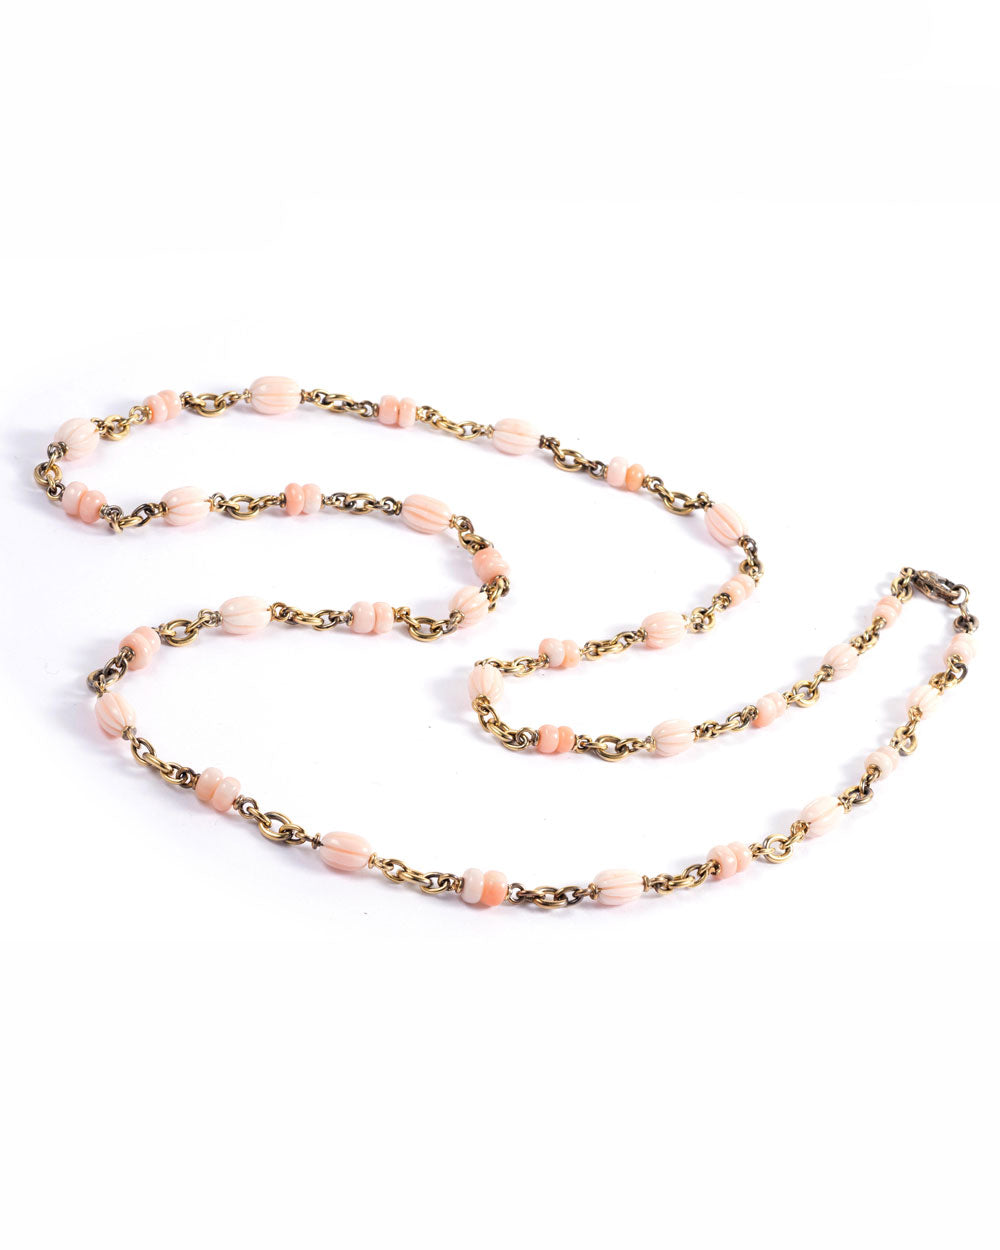 Pink Coral Carved Beaded Necklace